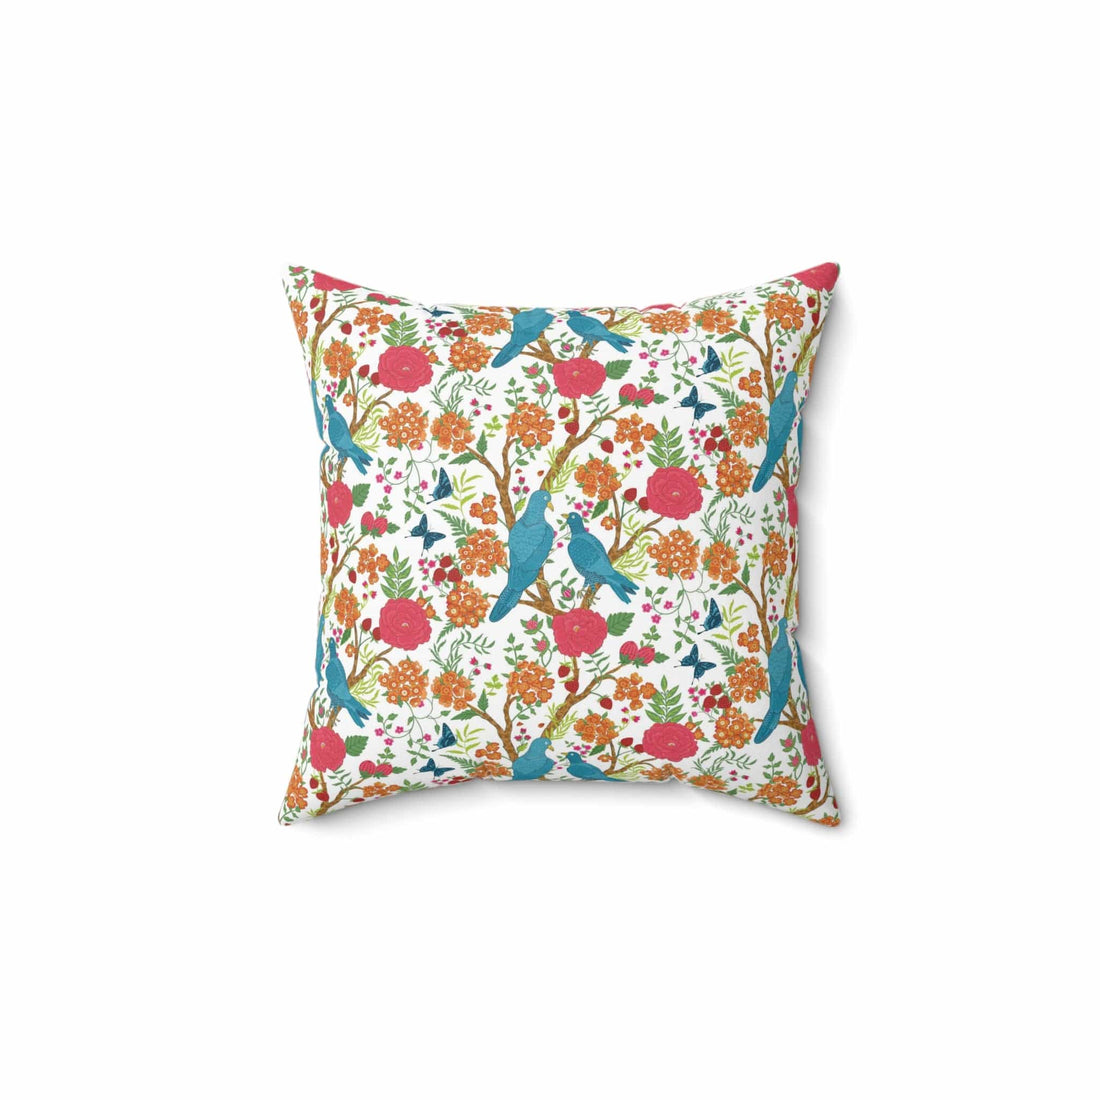 Kate McEnroe New York Chinoiserie Tropical Bird Garden Pillow with Insert, Floral Cushion, Botanical Bird Throw Pillow KM13809924 Throw Pillows 14&quot; × 14&quot; 12261909374163439717